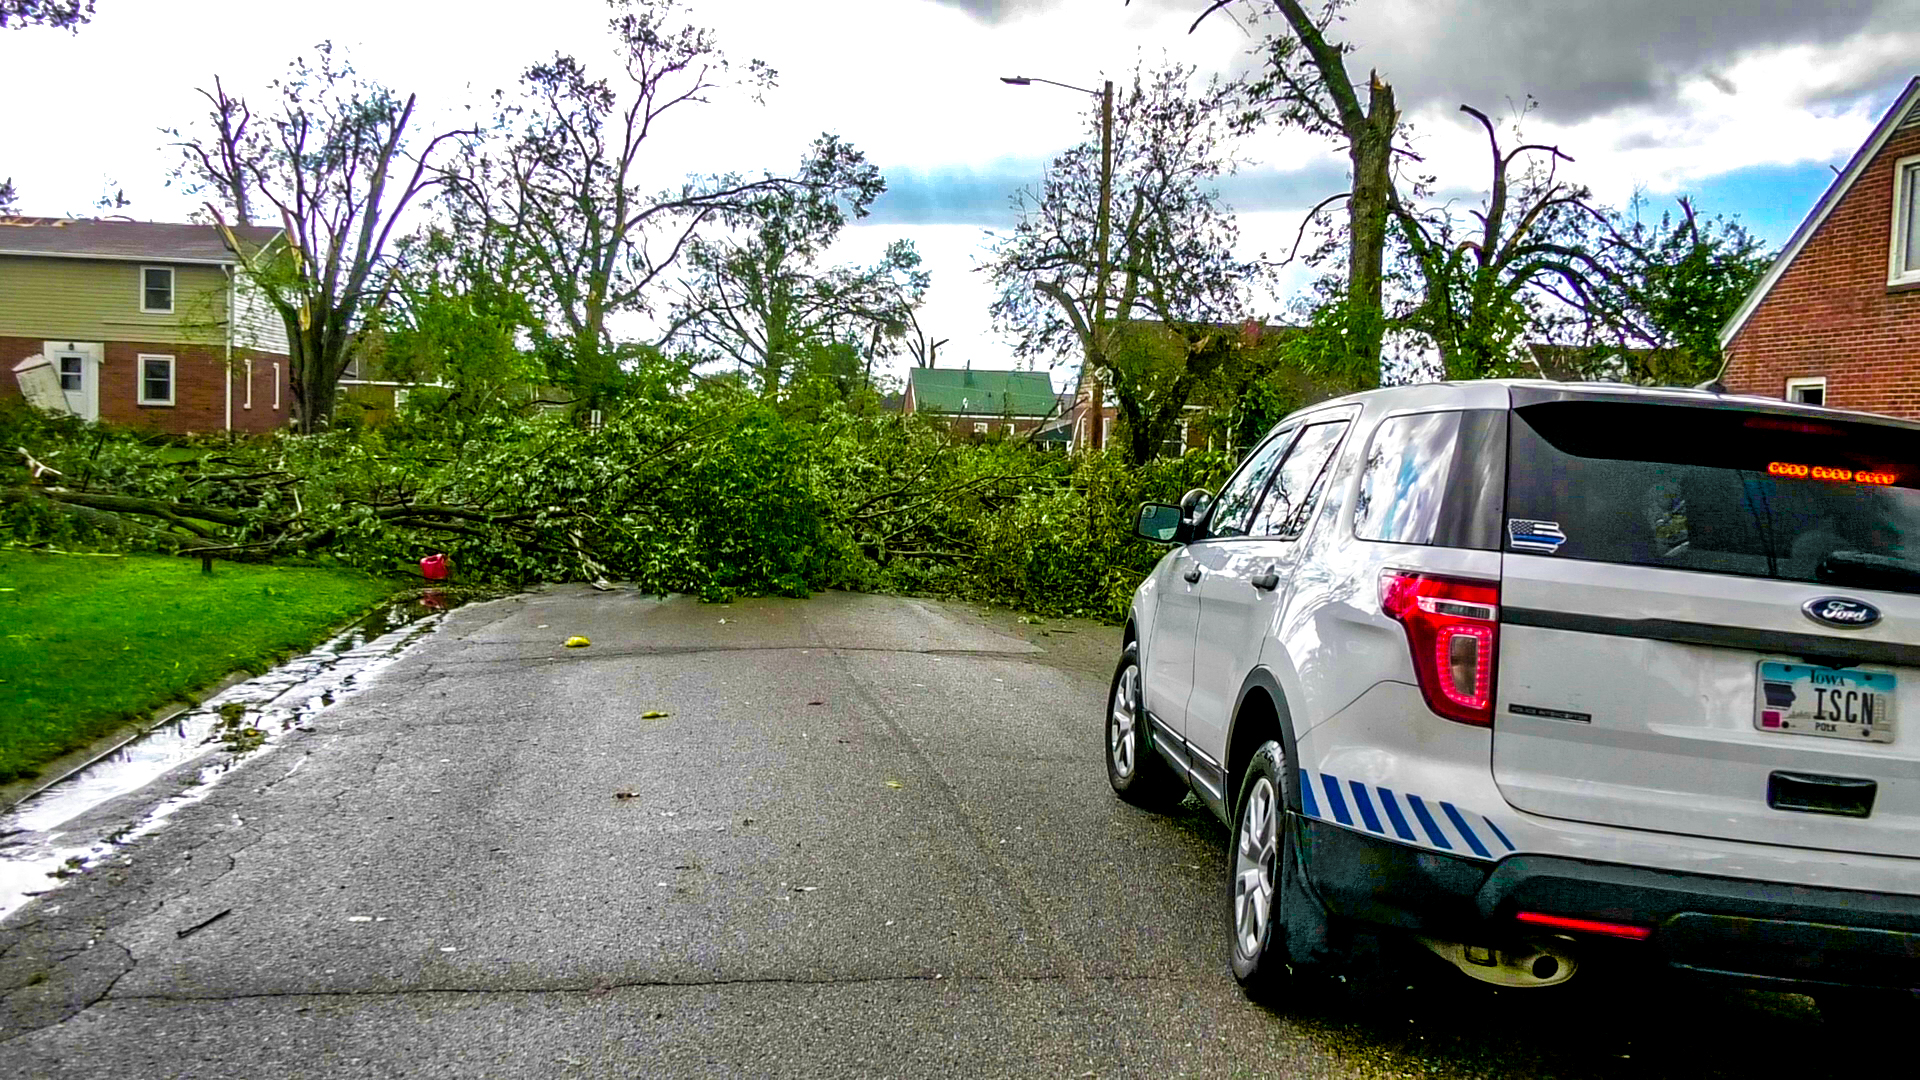 Trees block the road in front of the ISCN SUV after the Marshalltown, IA tornado on July 19th, 2018